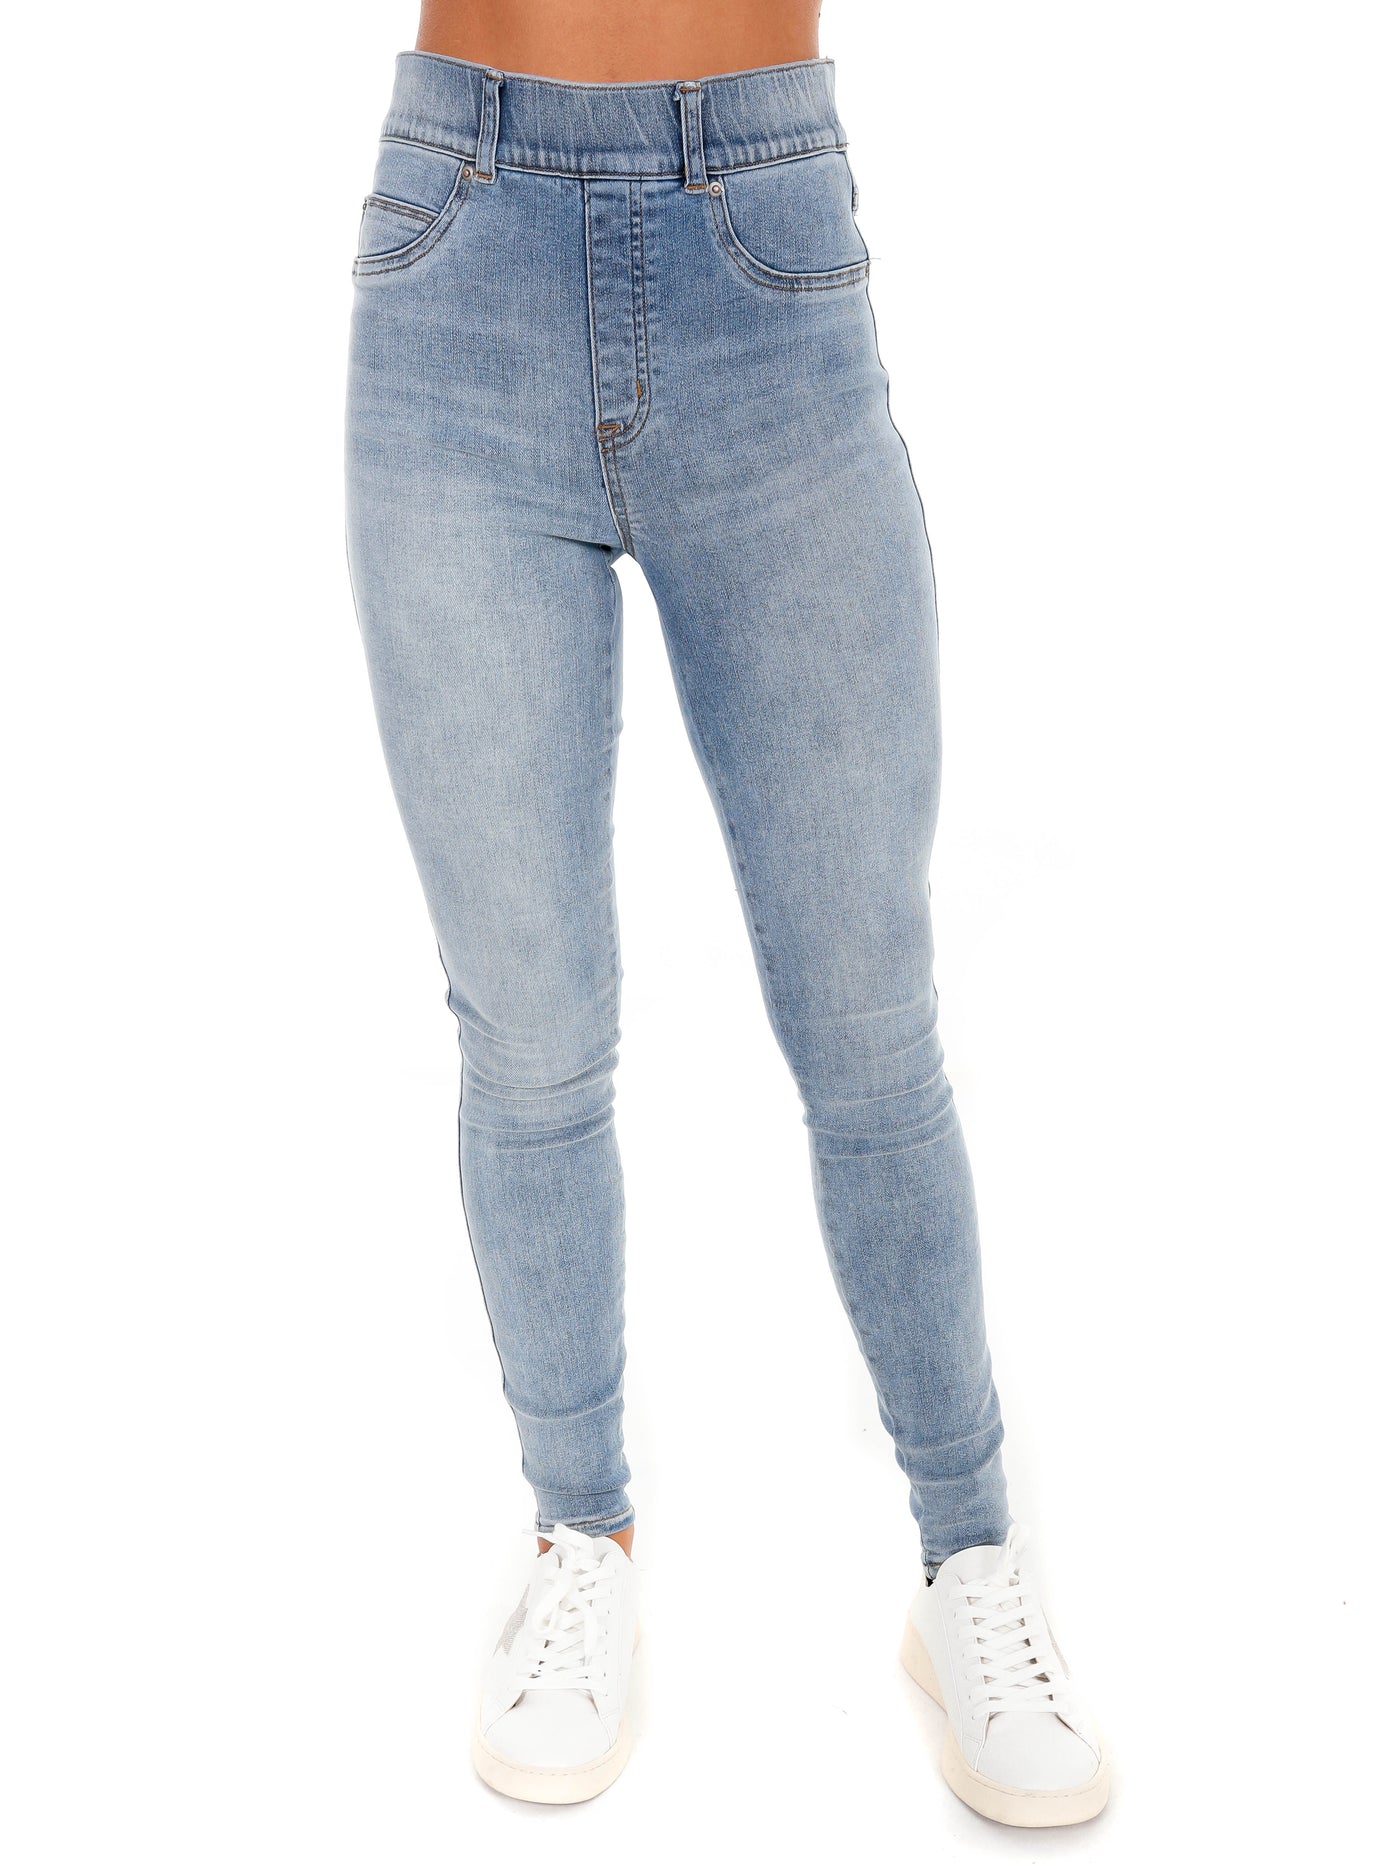 Buy SPANX® White Clean Denim Ankle Length Skinny Jeans from Next